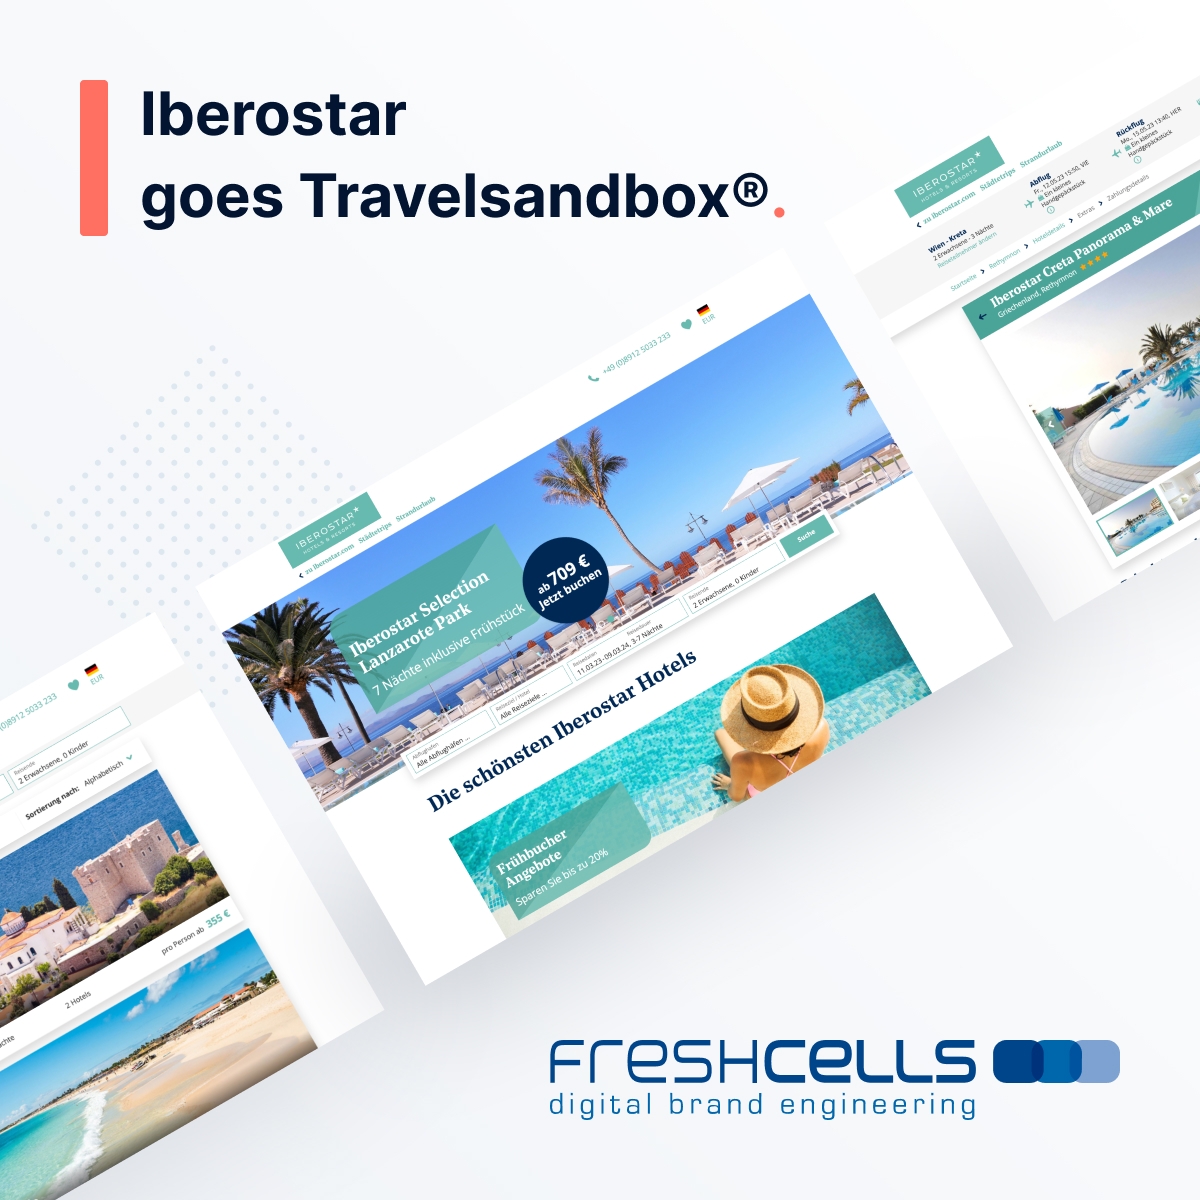 TravelSandbox from freshcells as a driver for the HLX Touristik GmbH business model